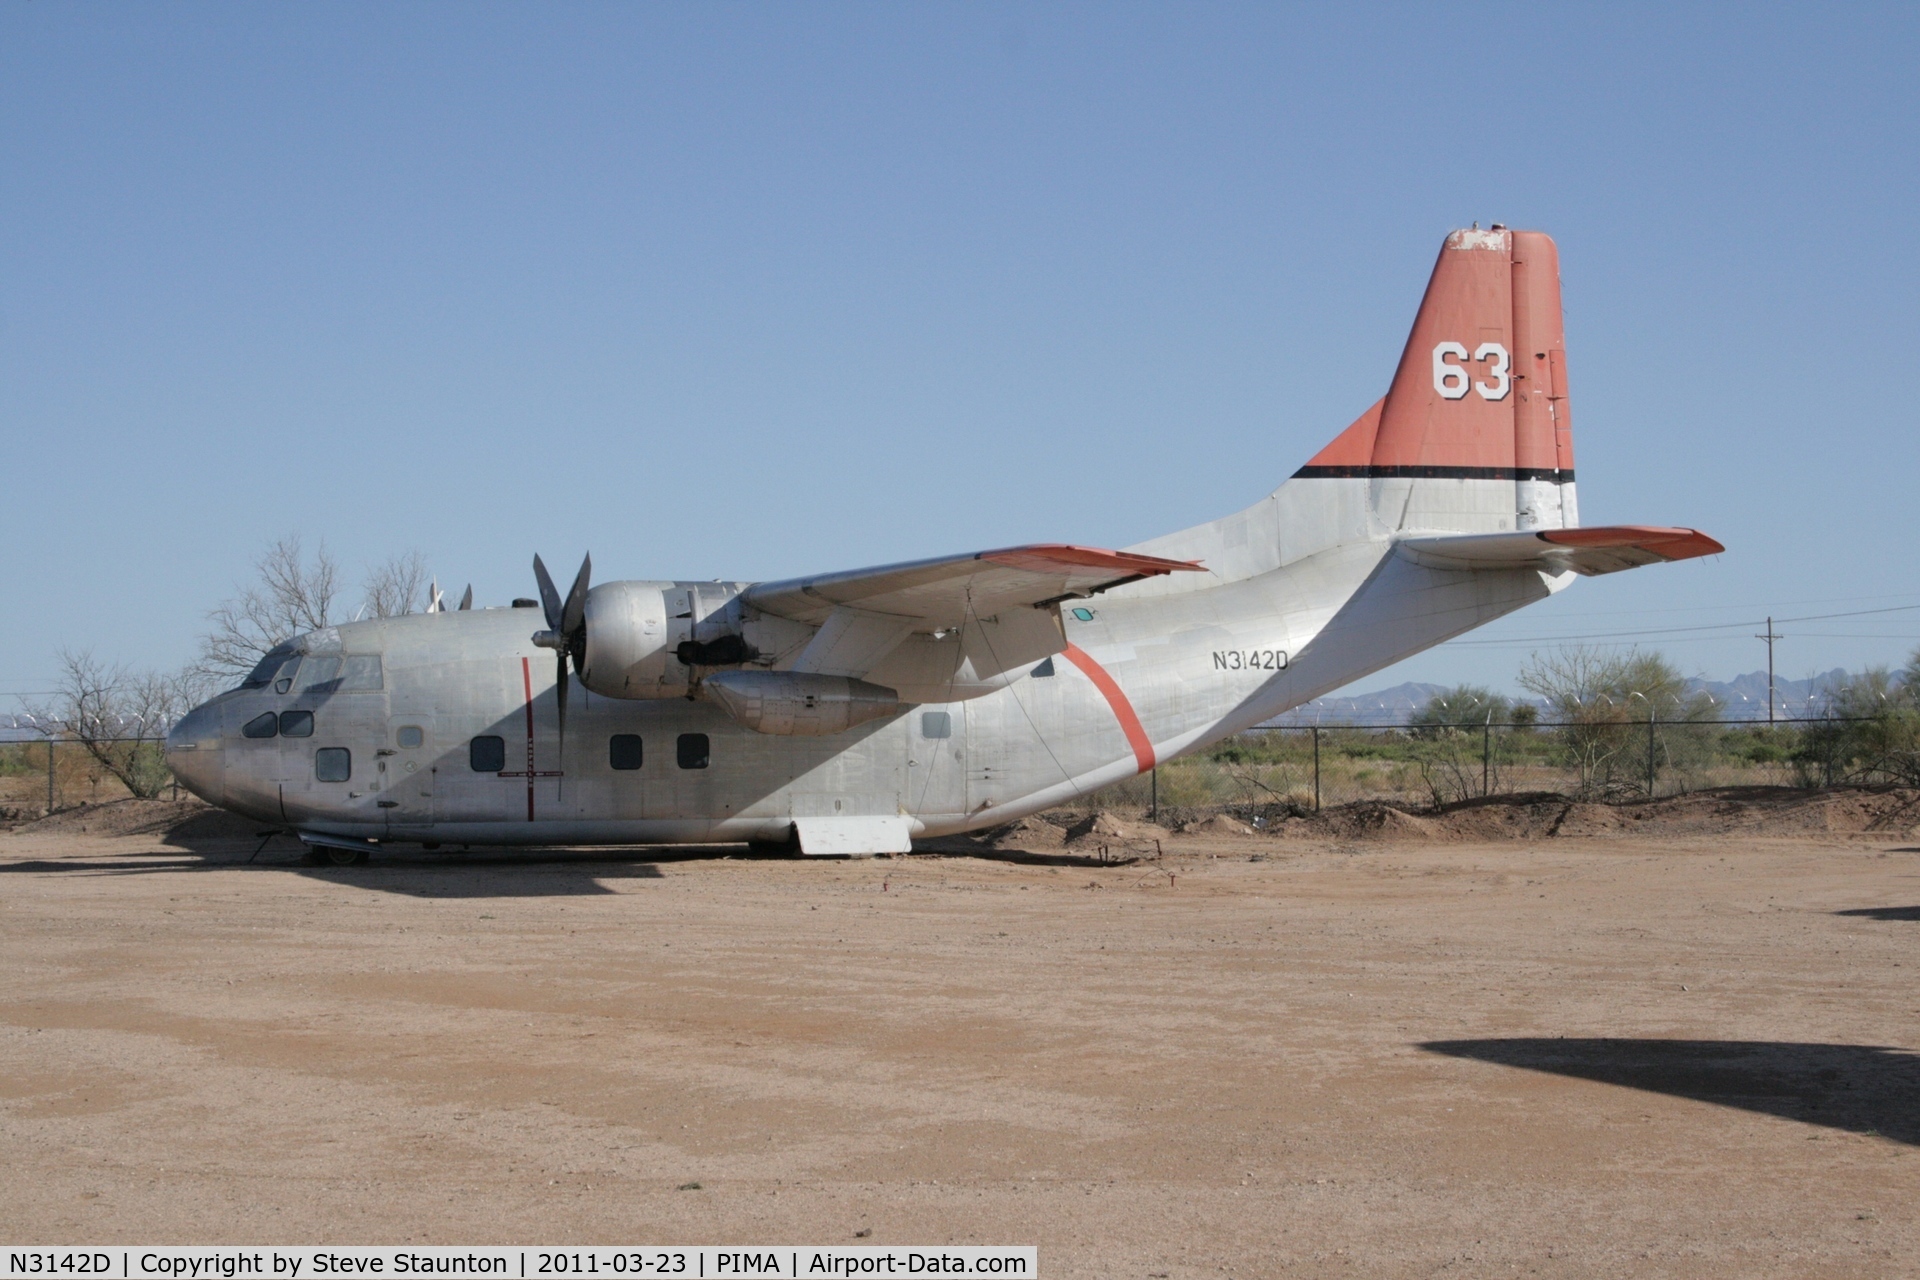 N3142D, 1954 Fairchild C-123K Provider C/N 20029, Taken at Pima Air and Space Museum, in March 2011 whilst on an Aeroprint Aviation tour